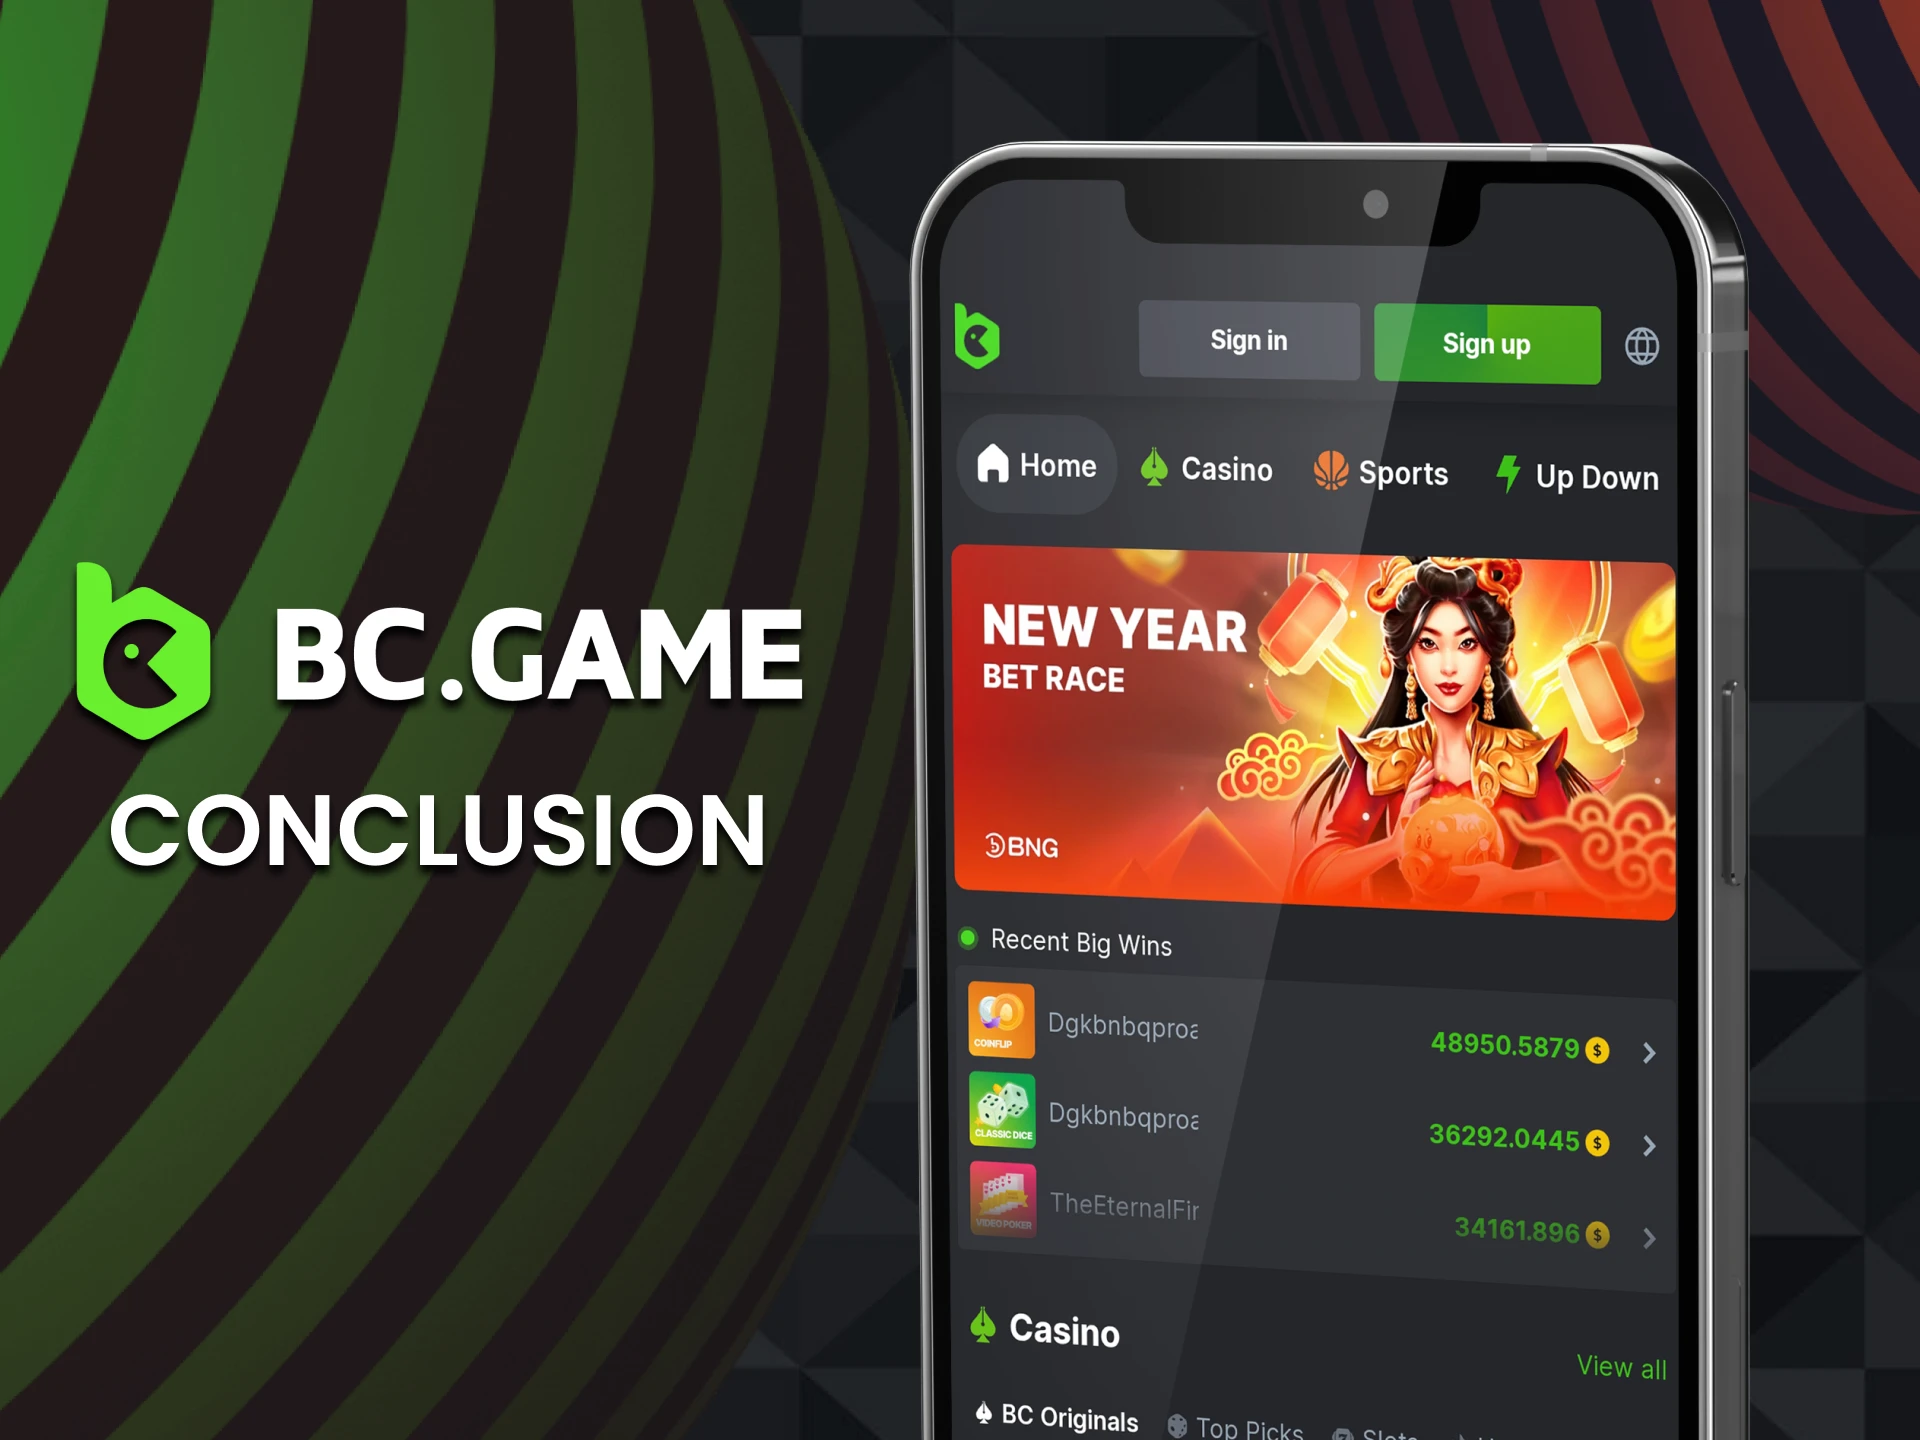 The BC Game app is ideal for betting and gaming.